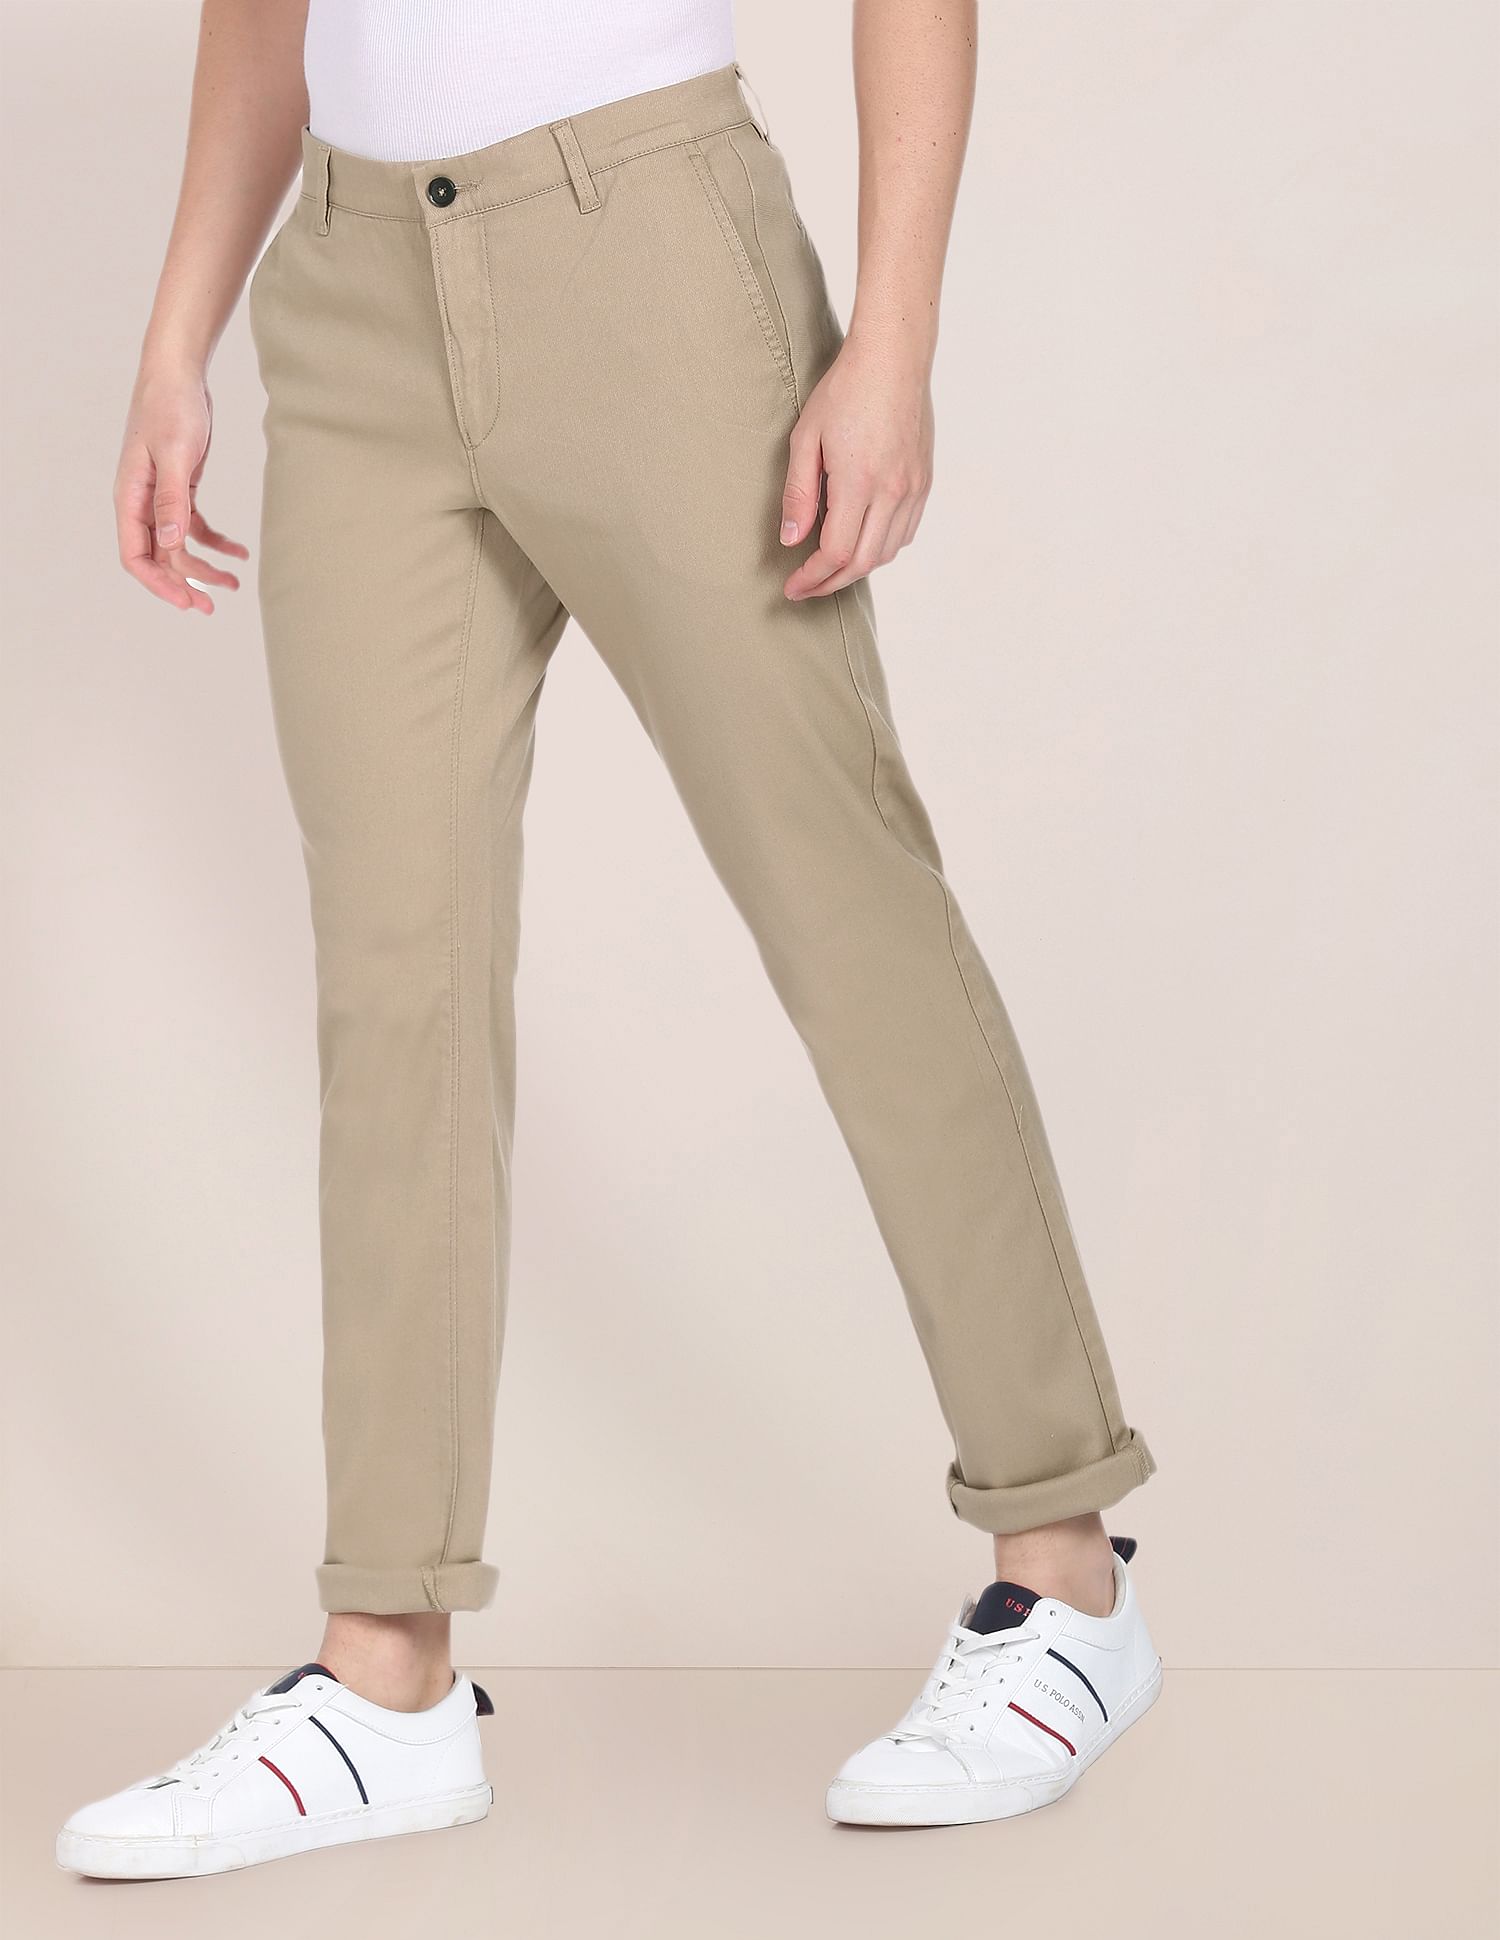 Buy Camel Brown Trousers  Pants for Men by Nation Polo Club Online   Ajiocom